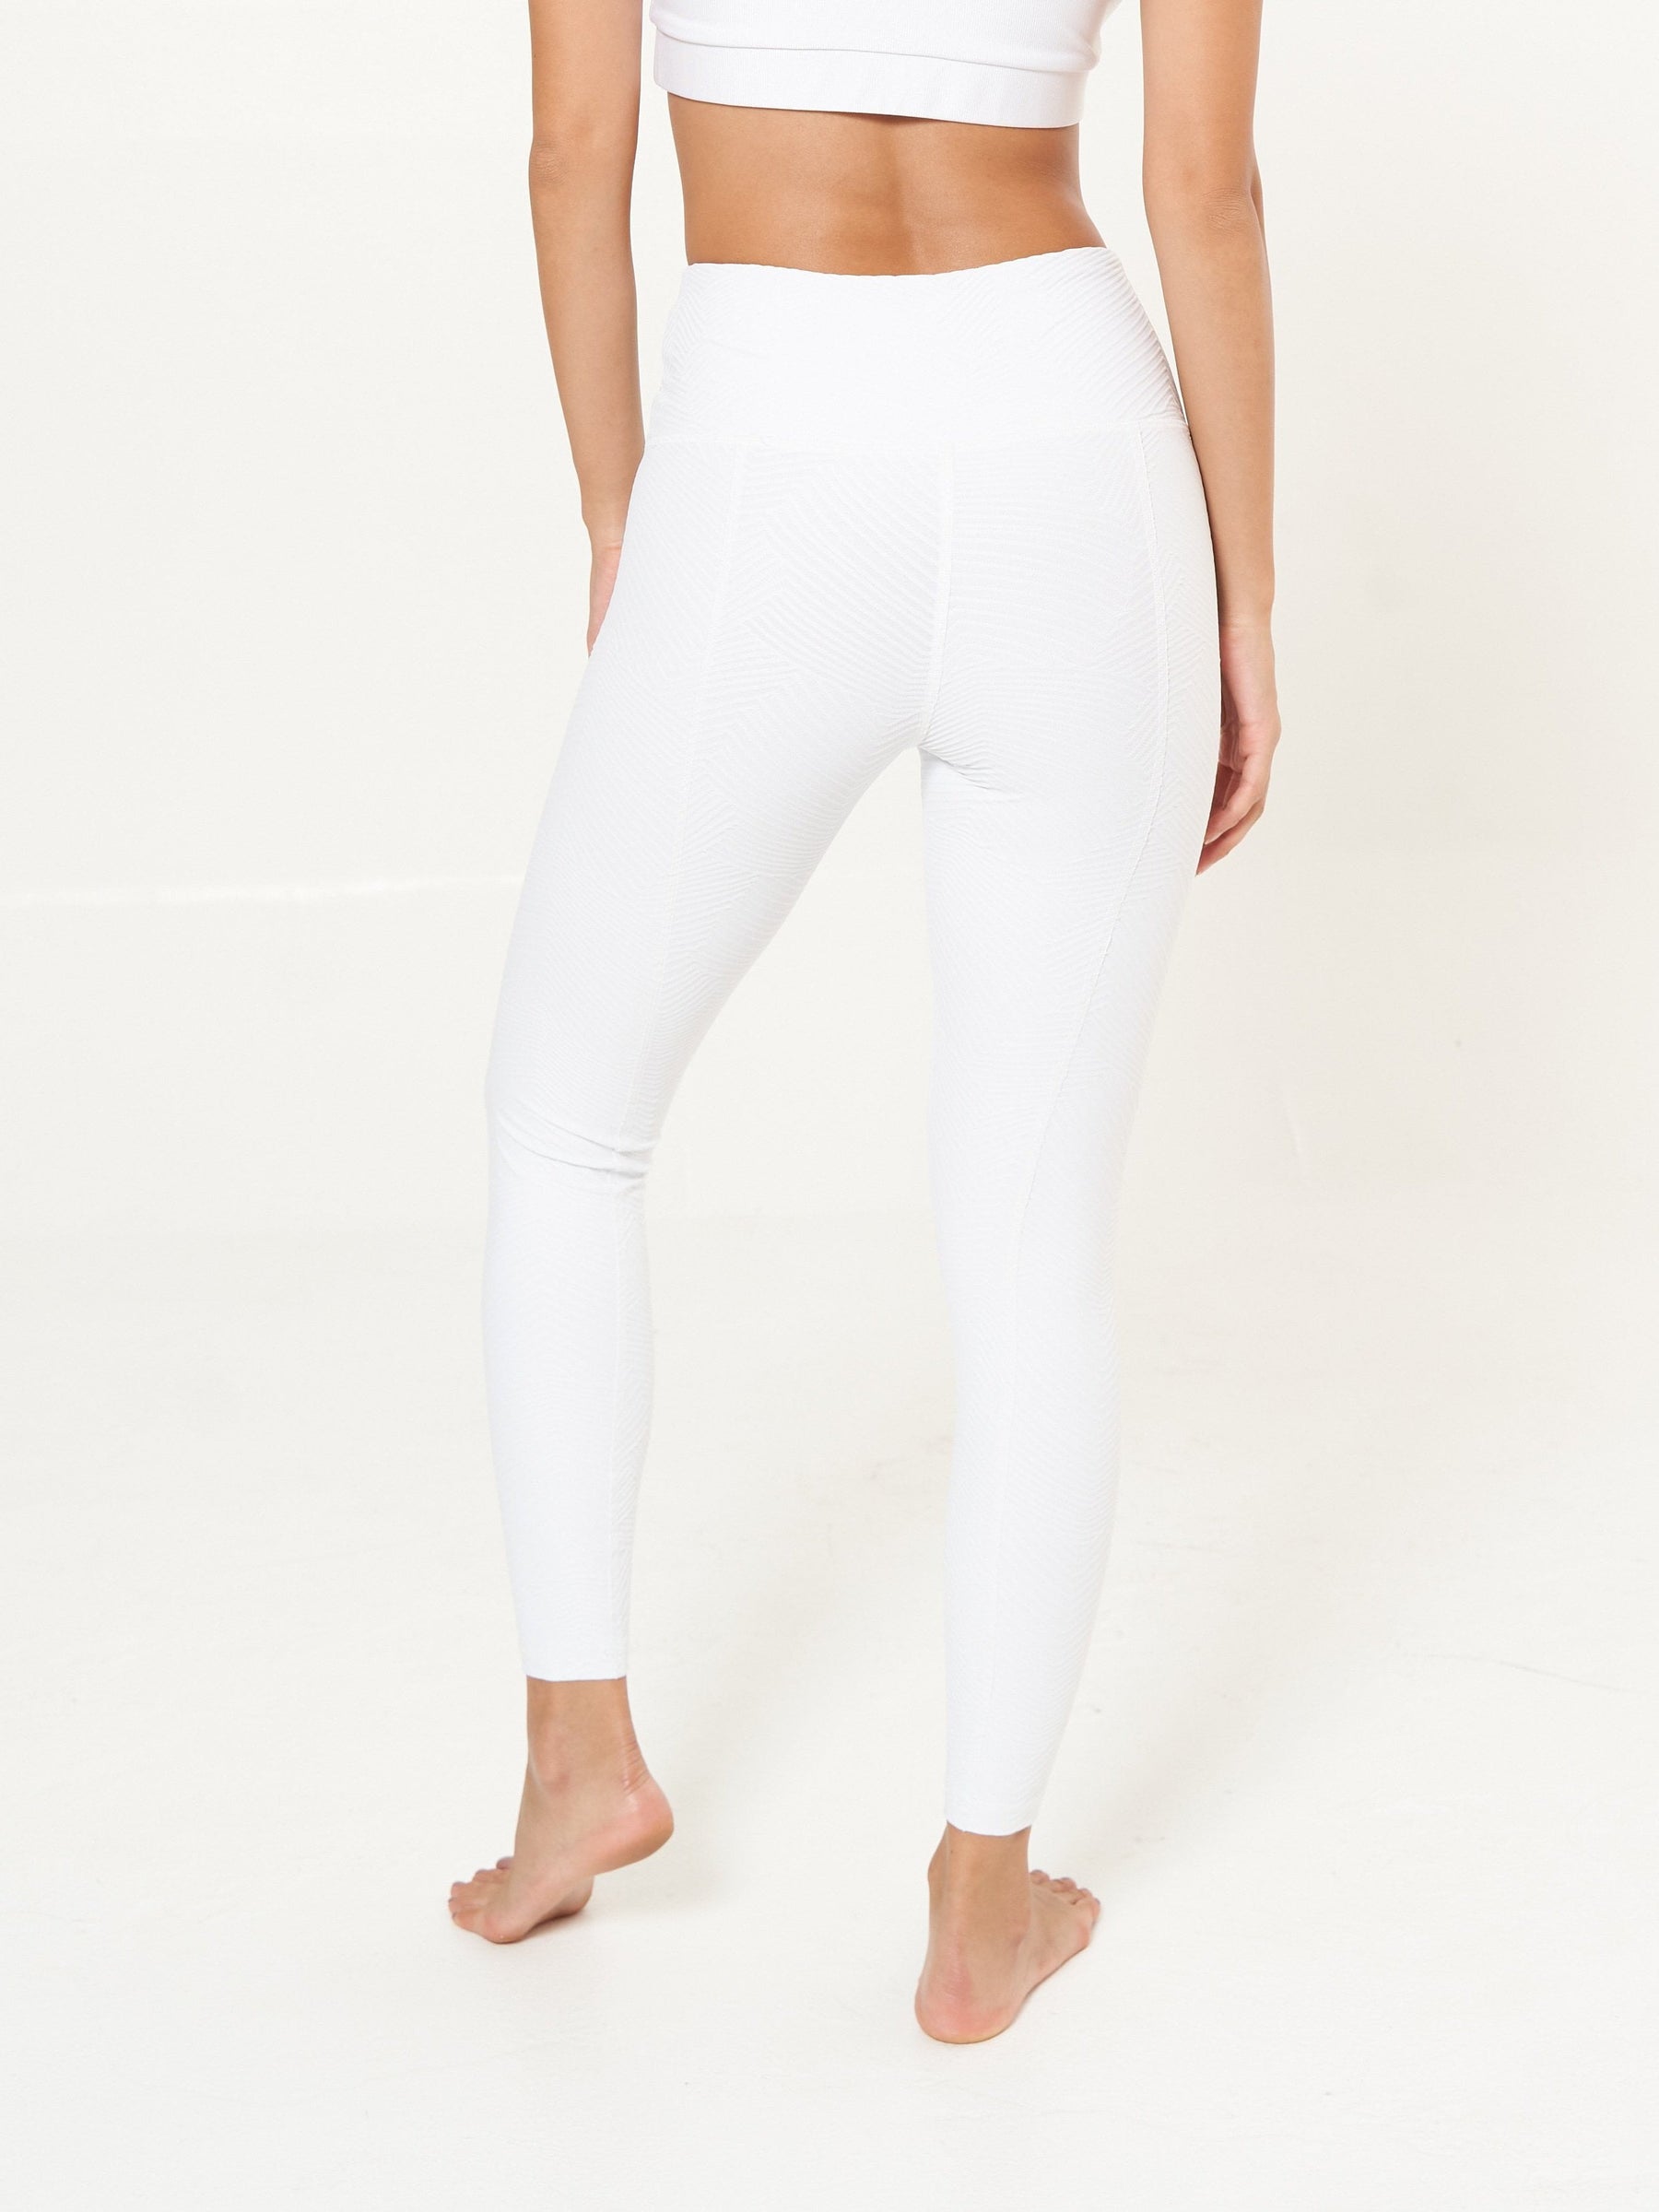 Leggings - Go Getters Classic White – Go Getters Clothing